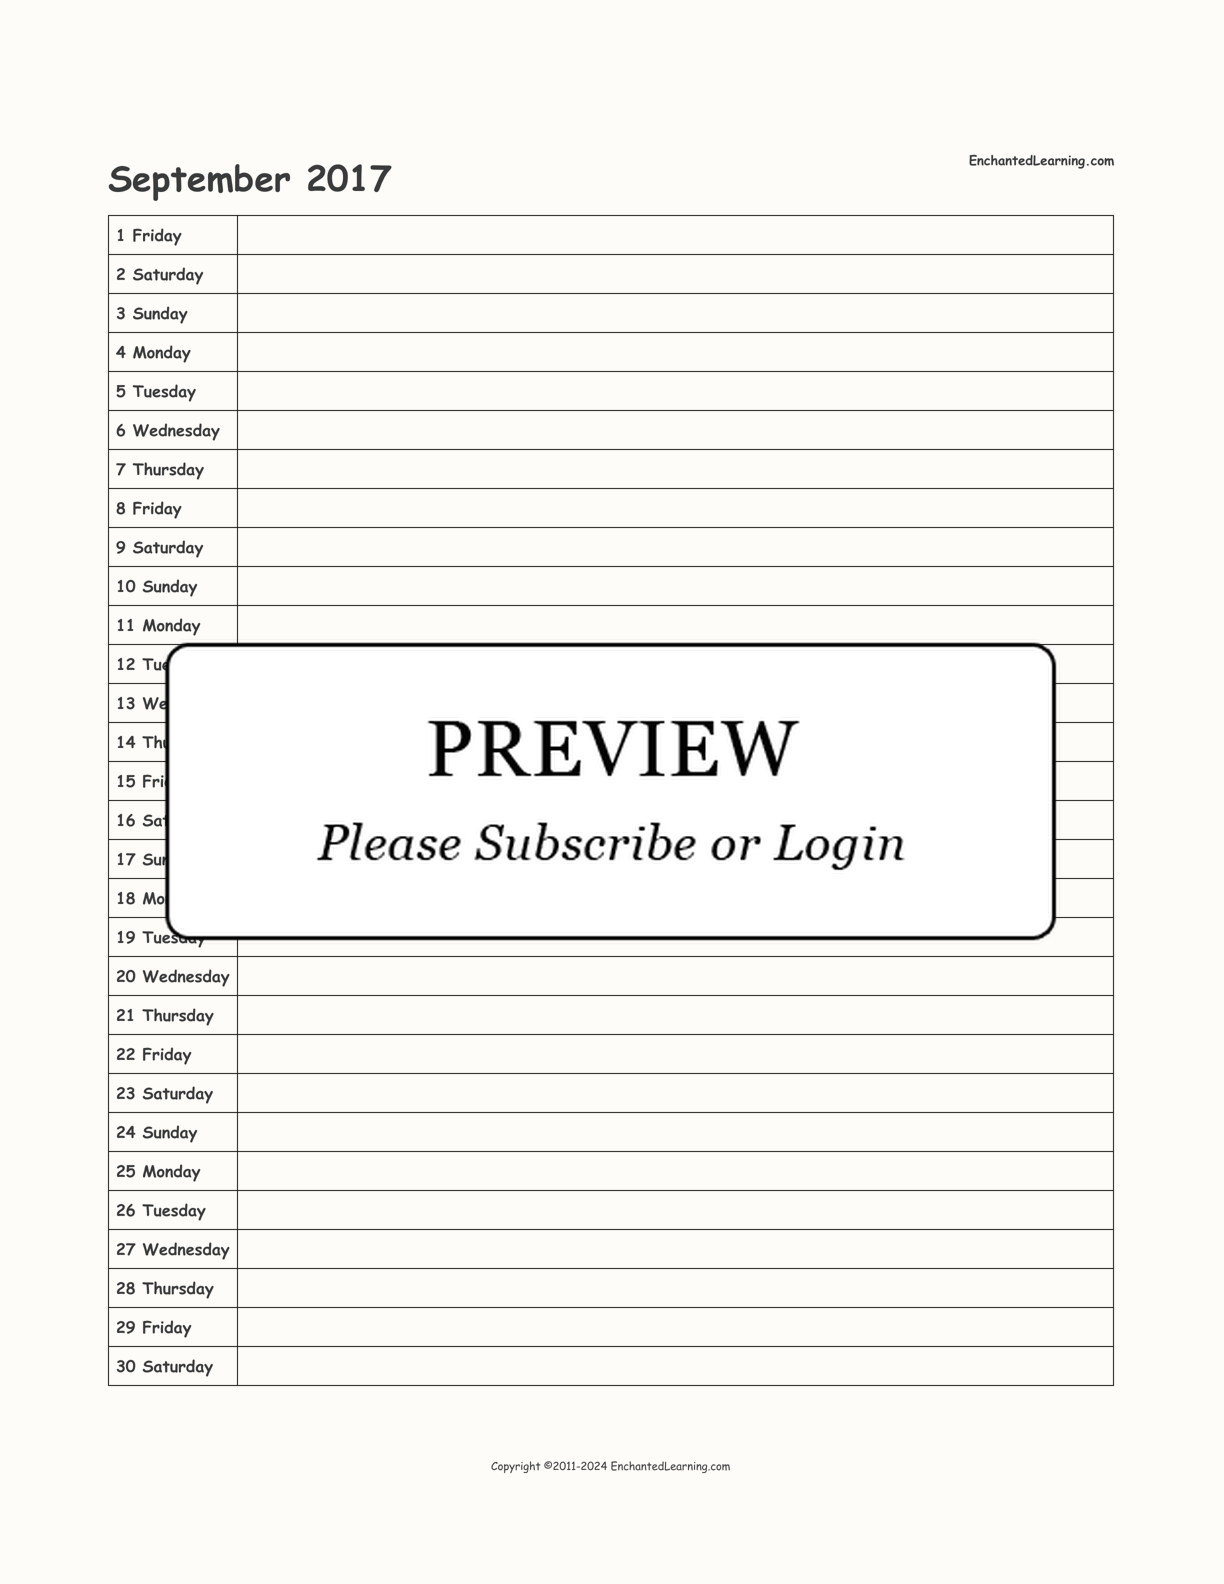 2017 Scheduling Calendar interactive printout page 9